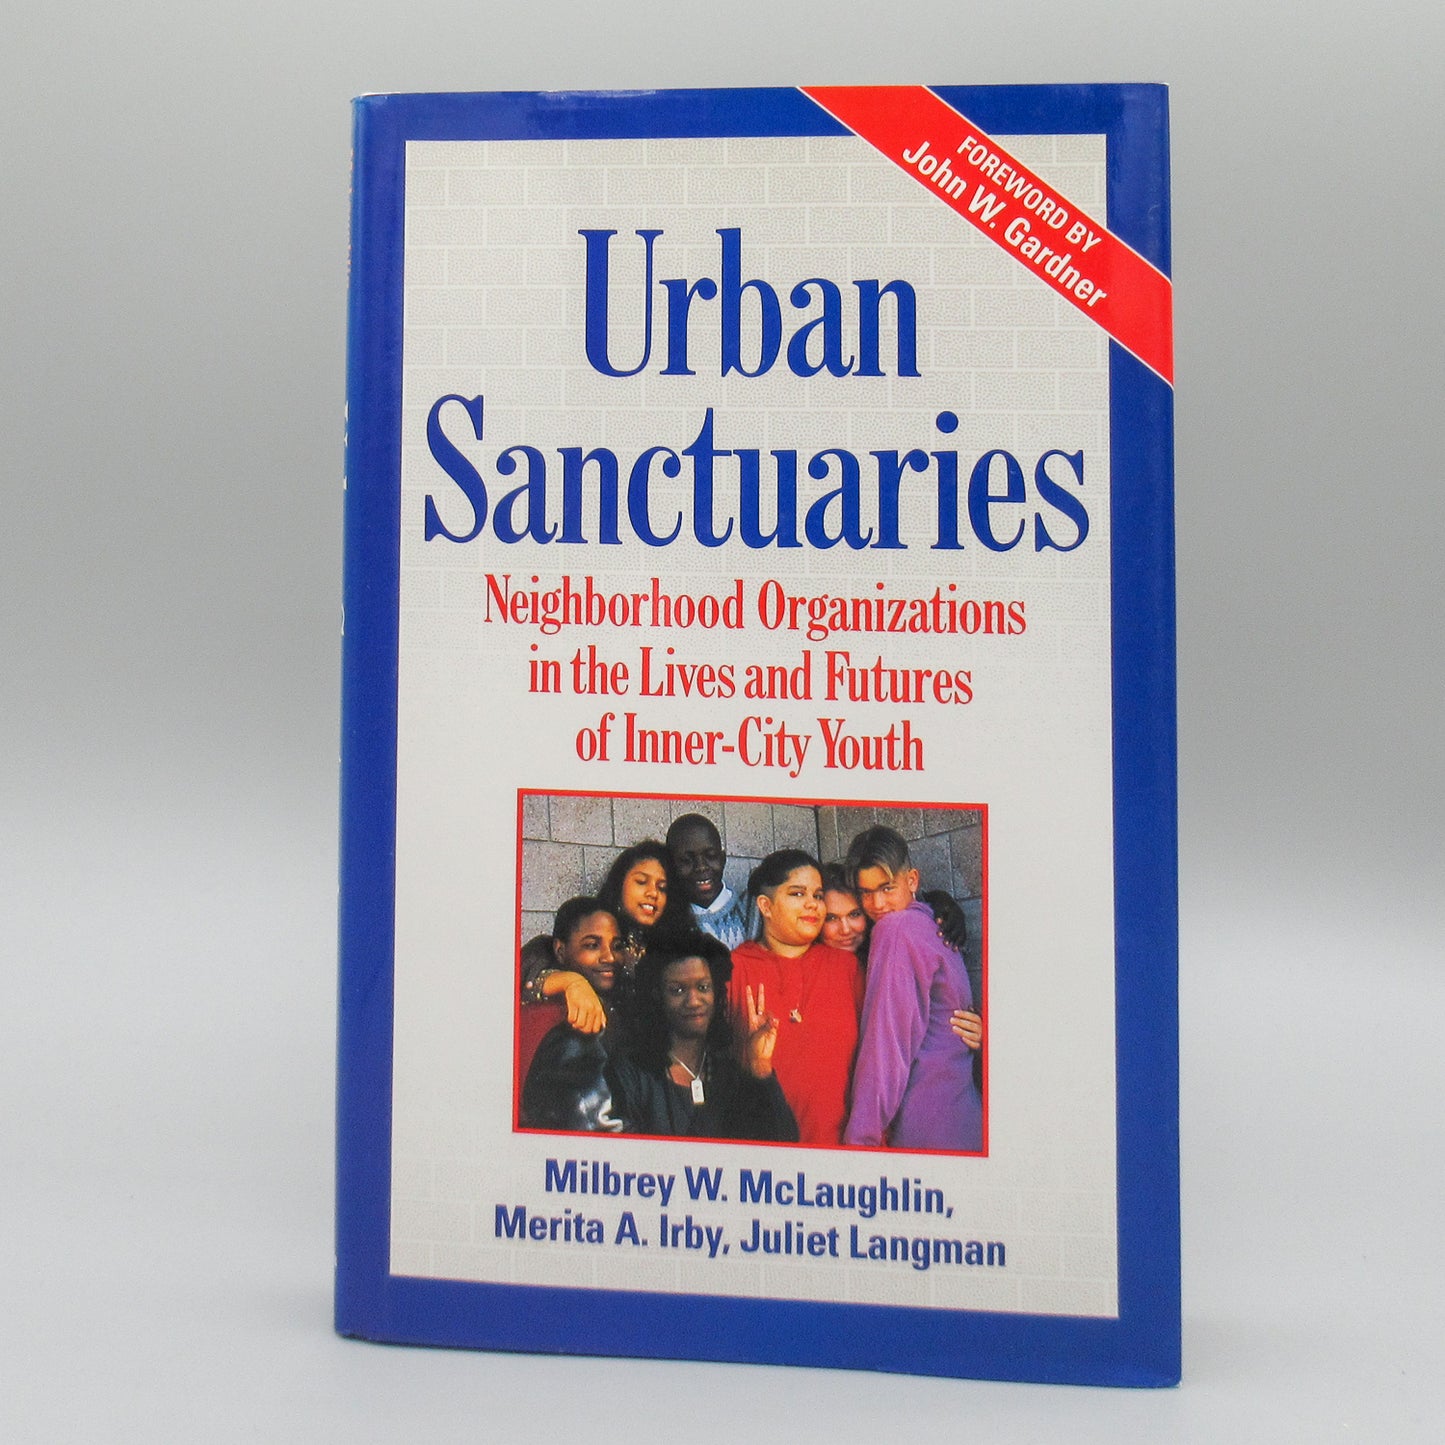 Urban Sanctuaries: Neighborhood Organizations in the Lives and Futures of Inner-City Youth